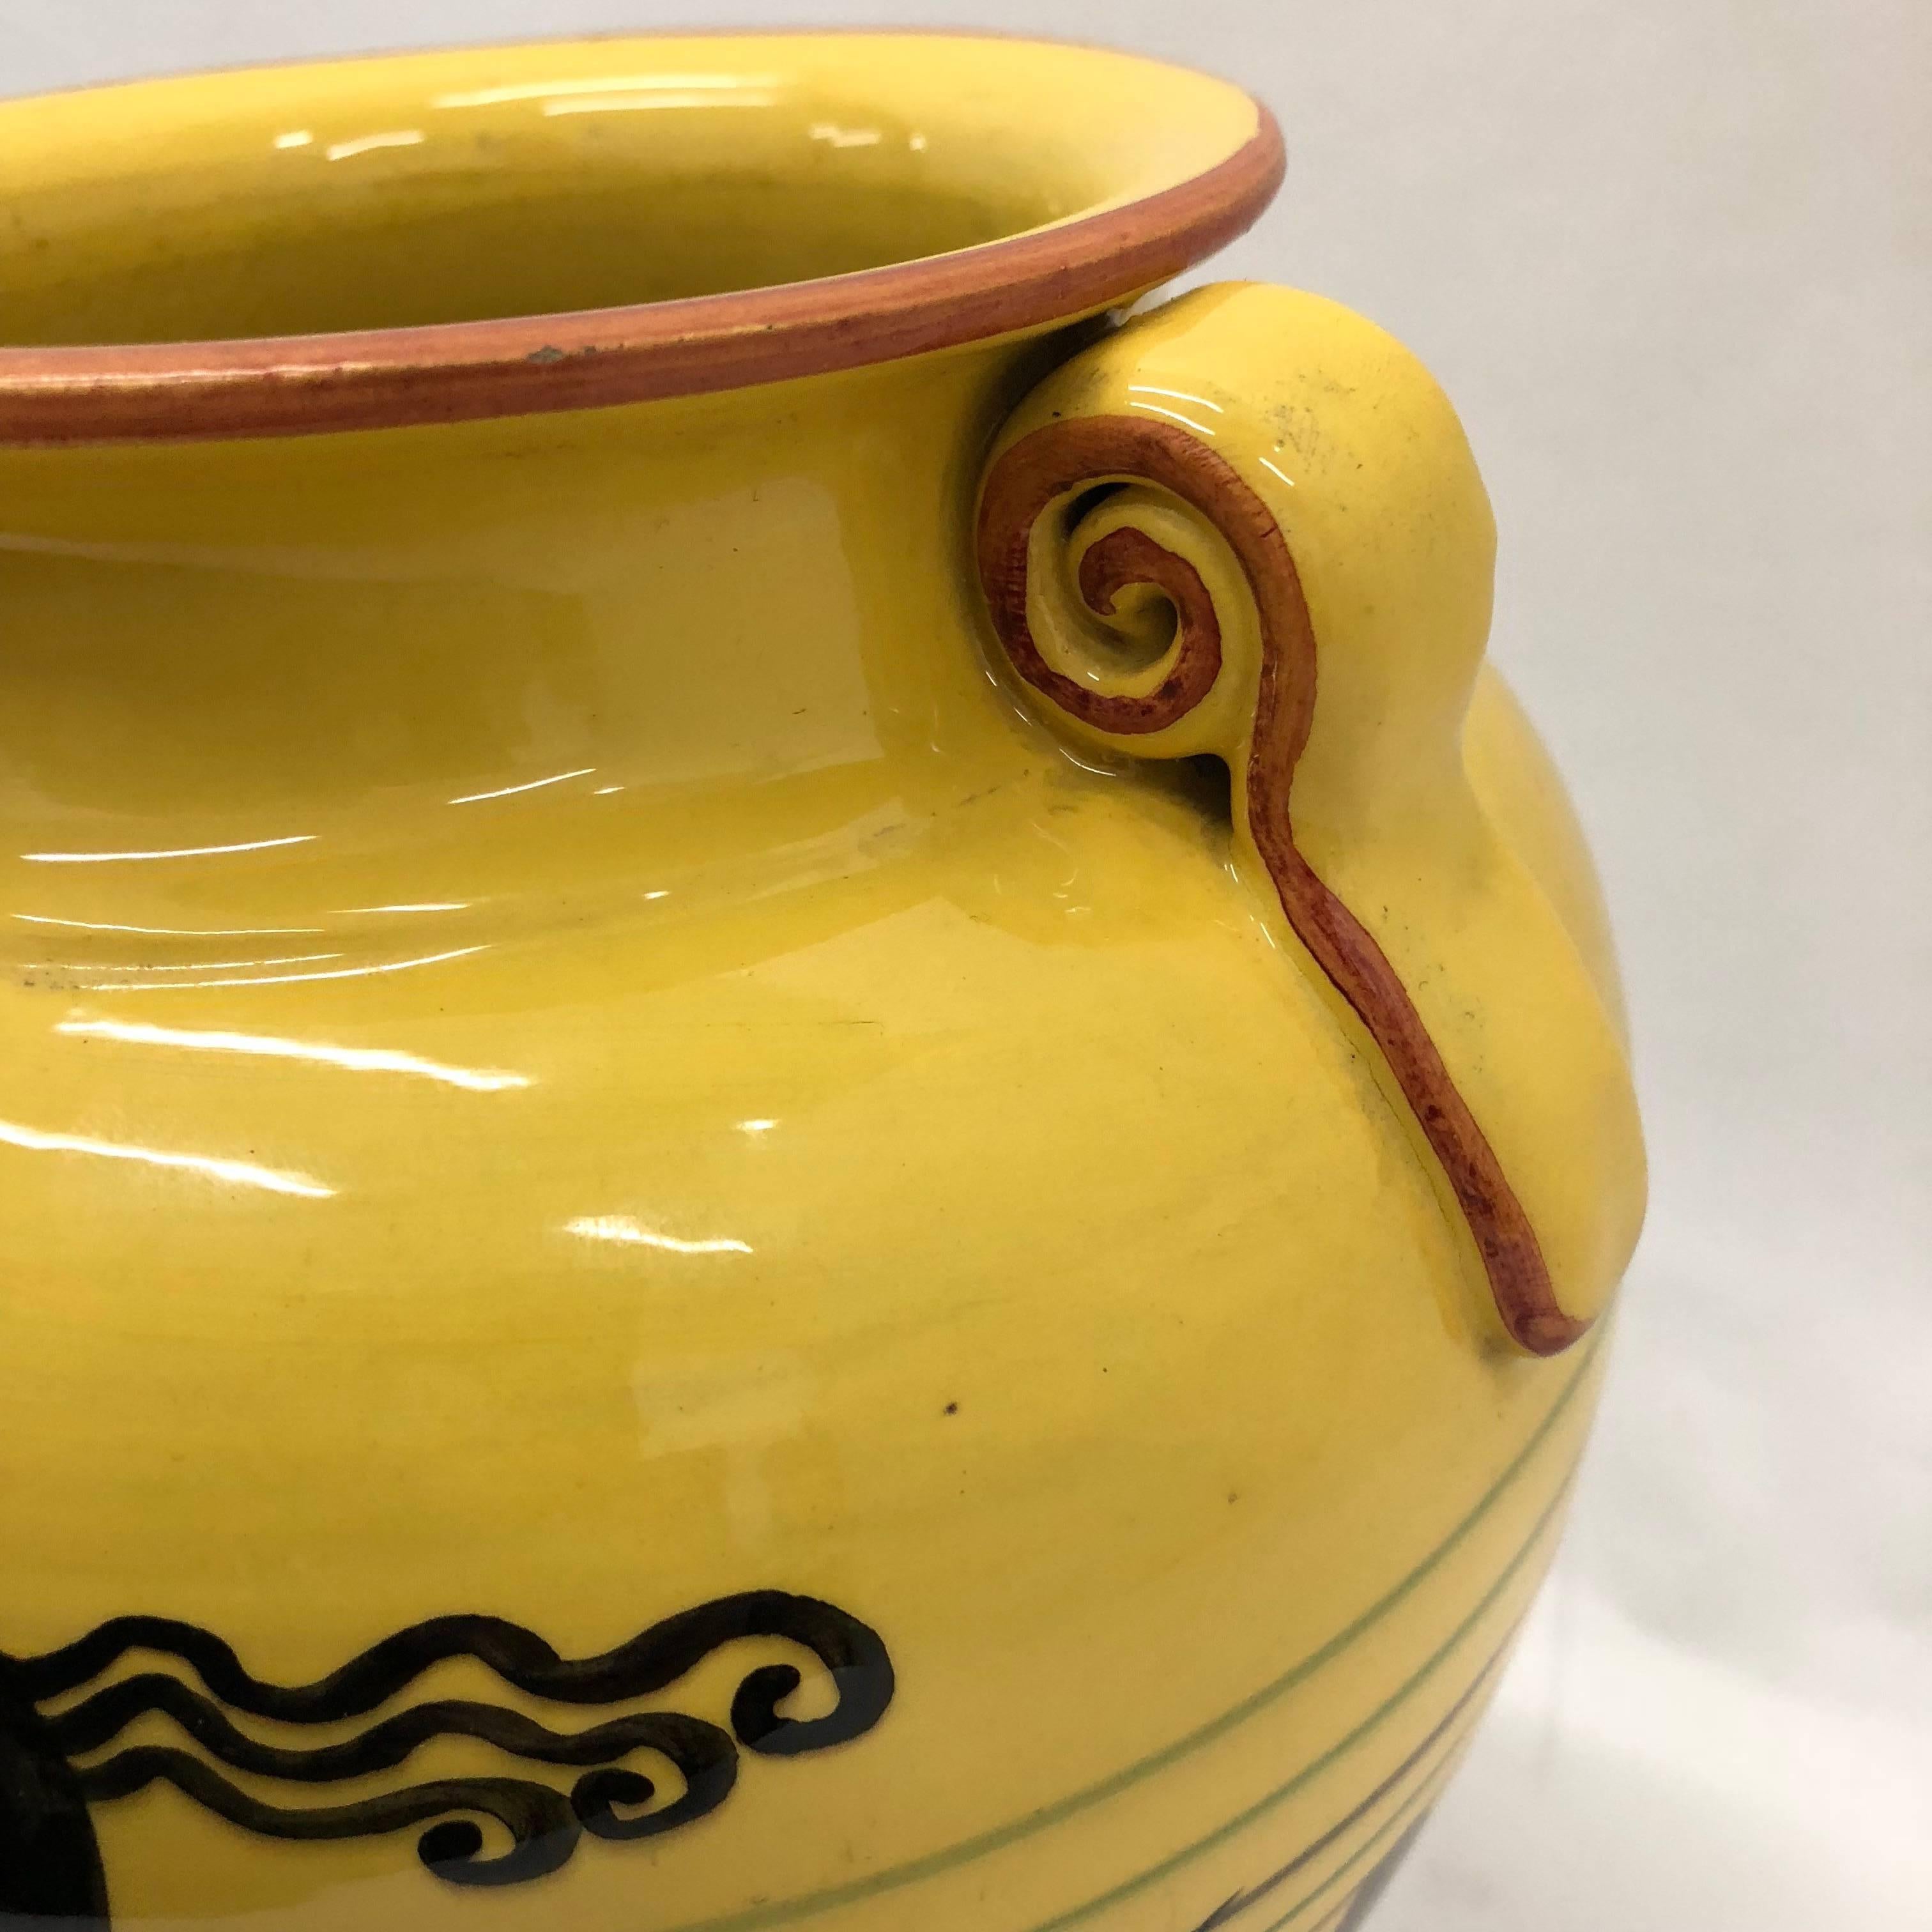 Stylish Art Deco hand-crafted terracotta vase made in Italy in 1930 in perfect conditions, signed Italy 115 on the bottom.